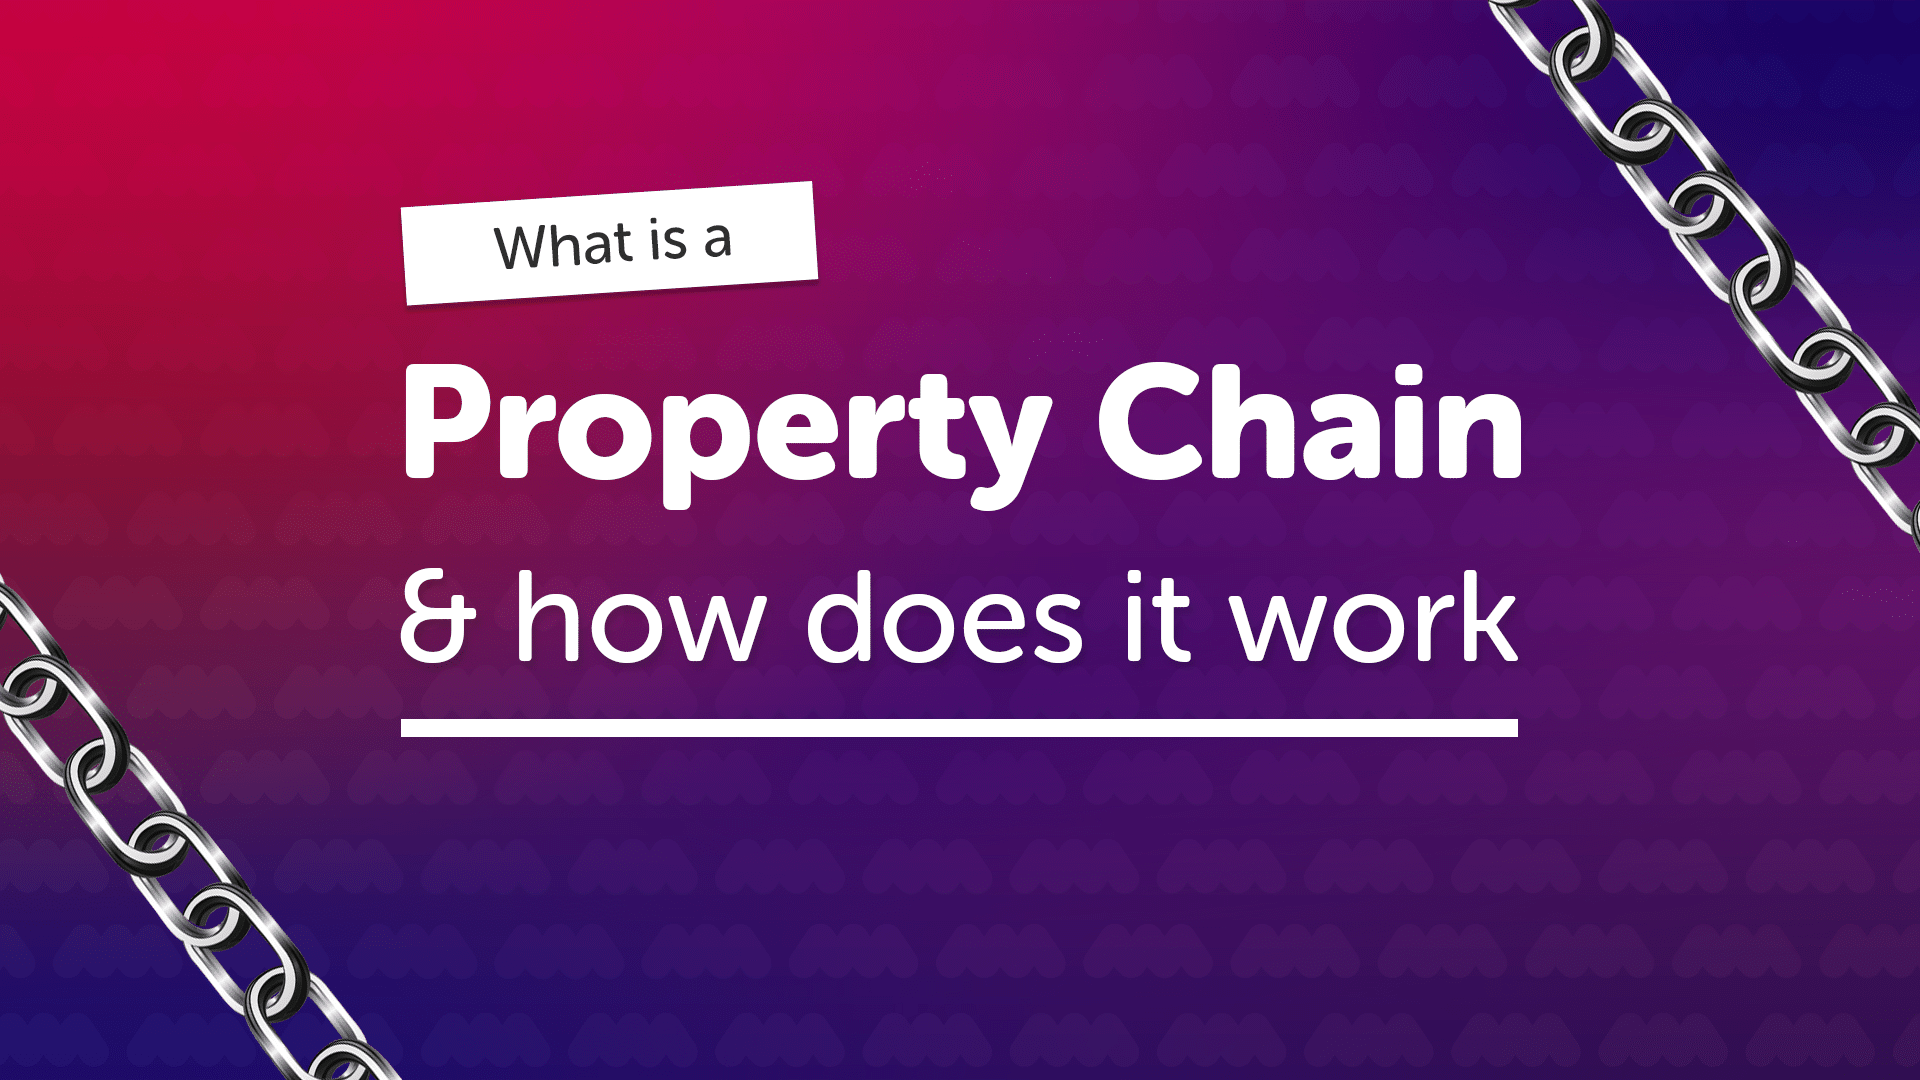 What is a Property Chain in Manchester